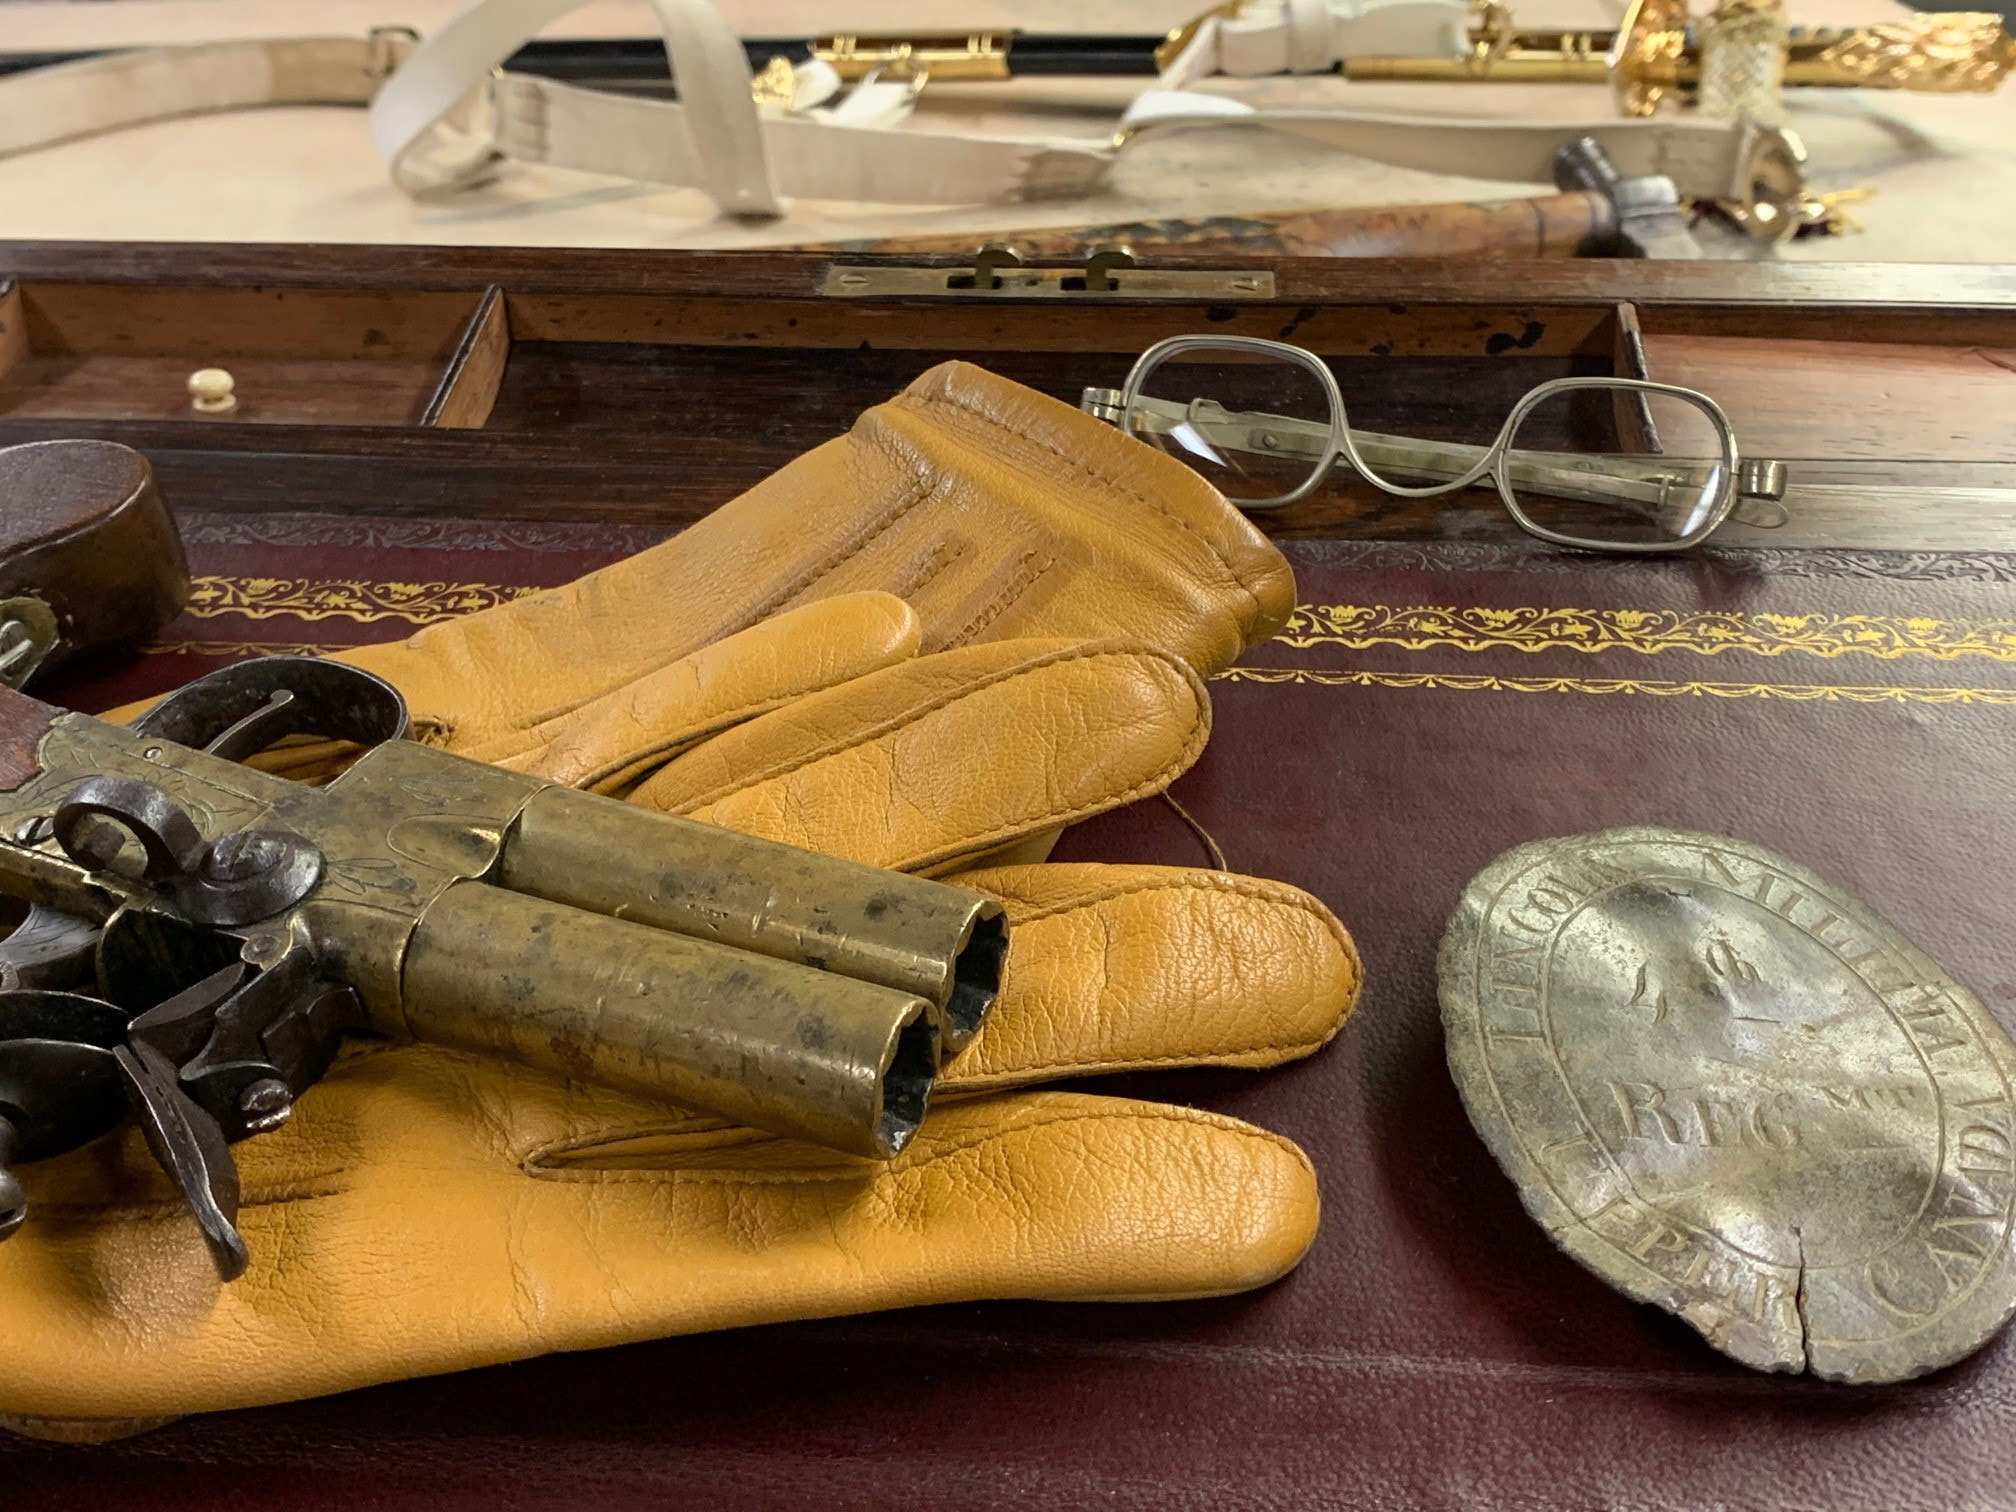 When Artifacts Attack: The story of the Battle of Fort George as told through Artifacts.